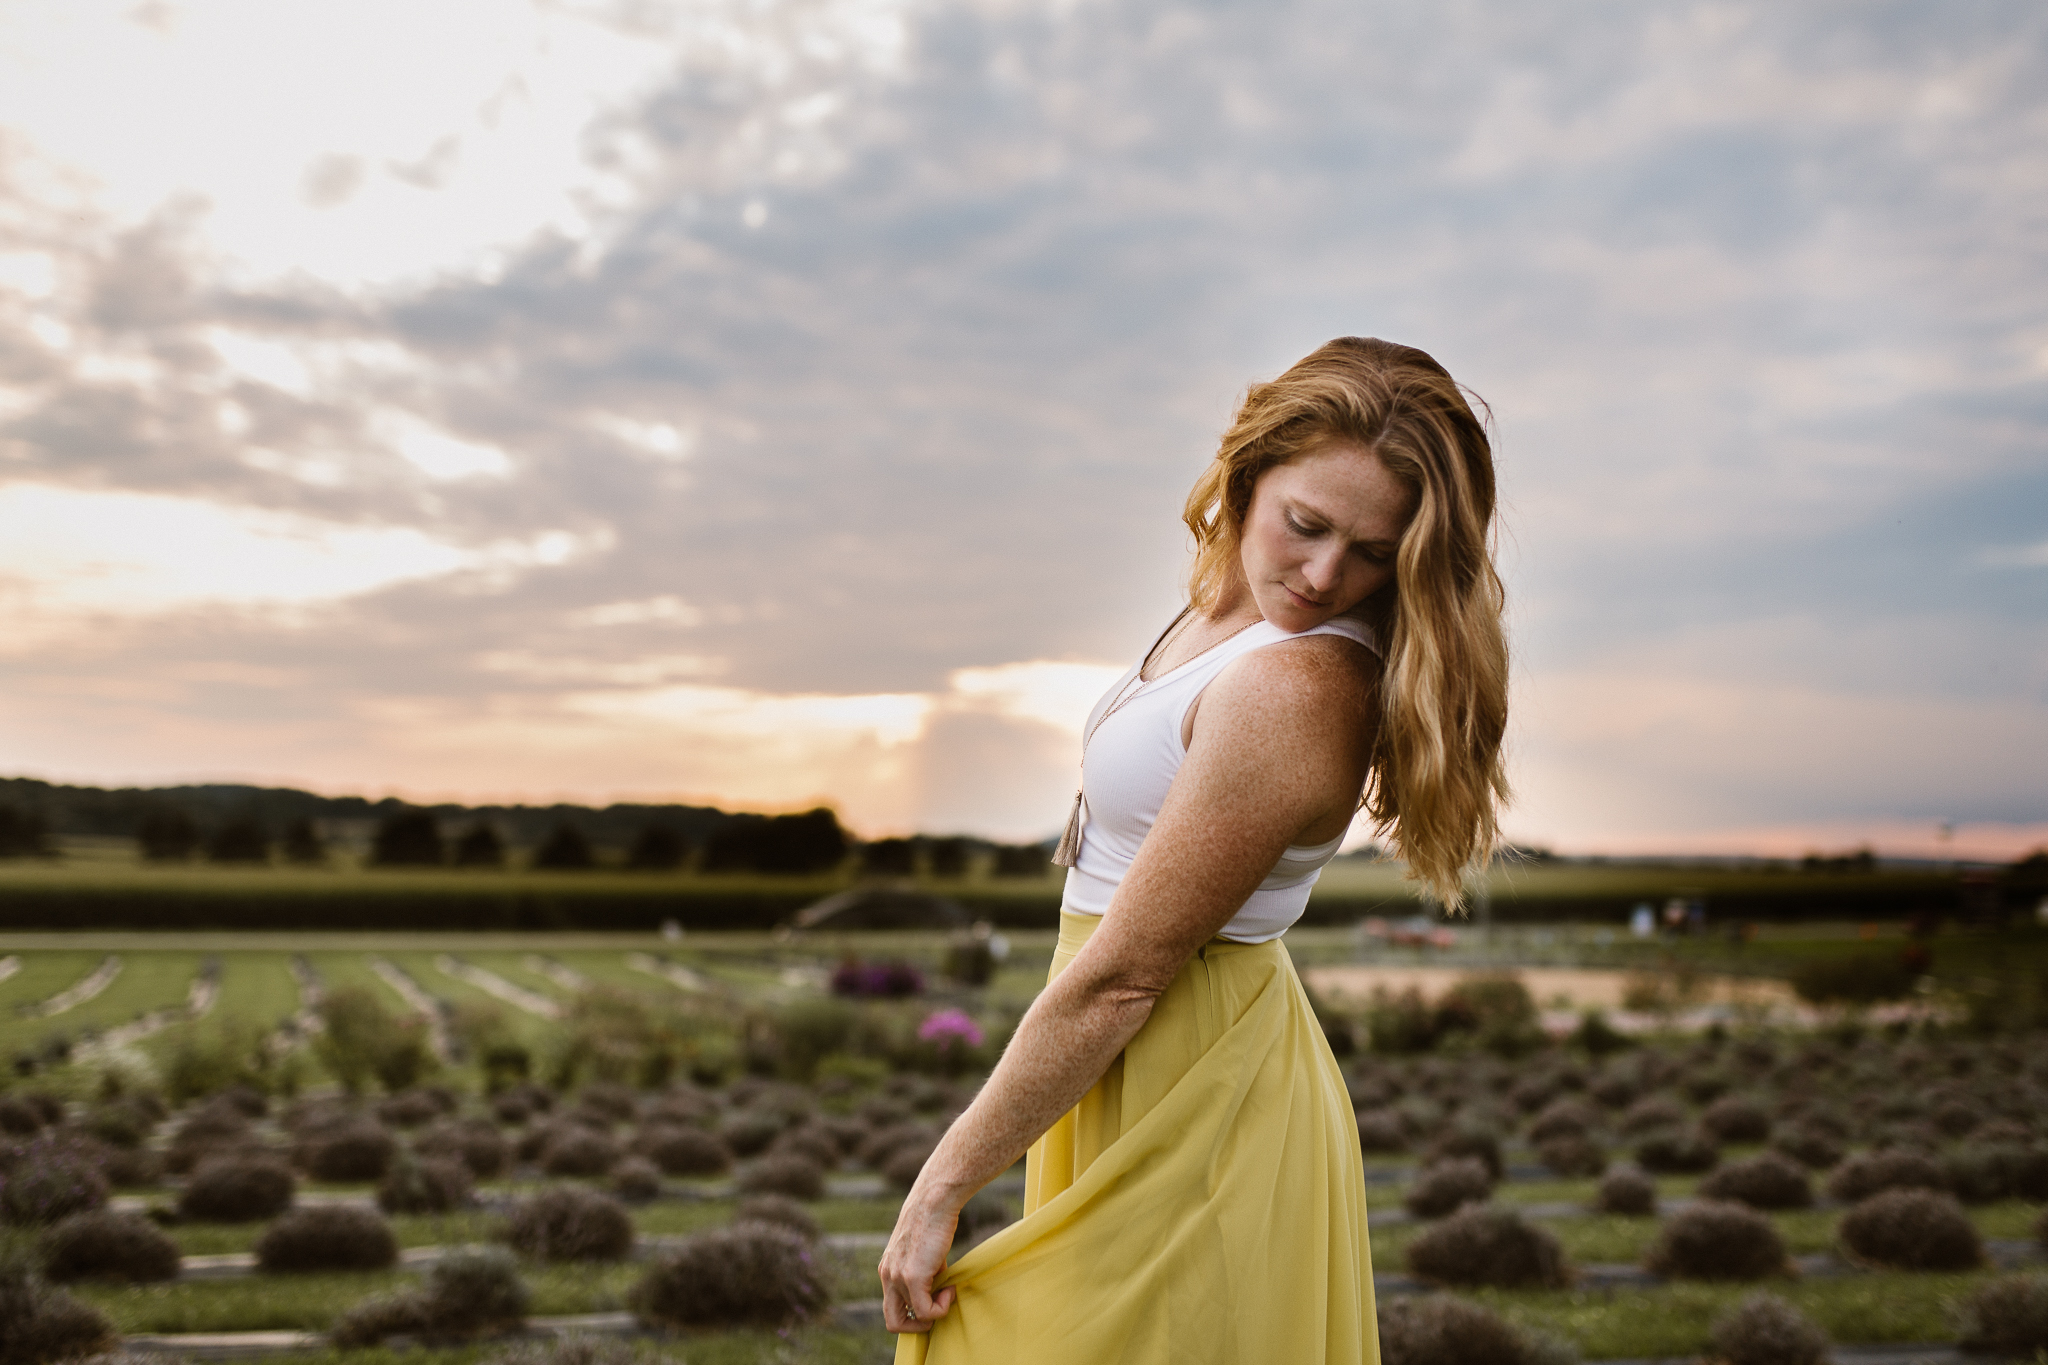 Red headed woman in yellow skirt at sunset in a lavender field.